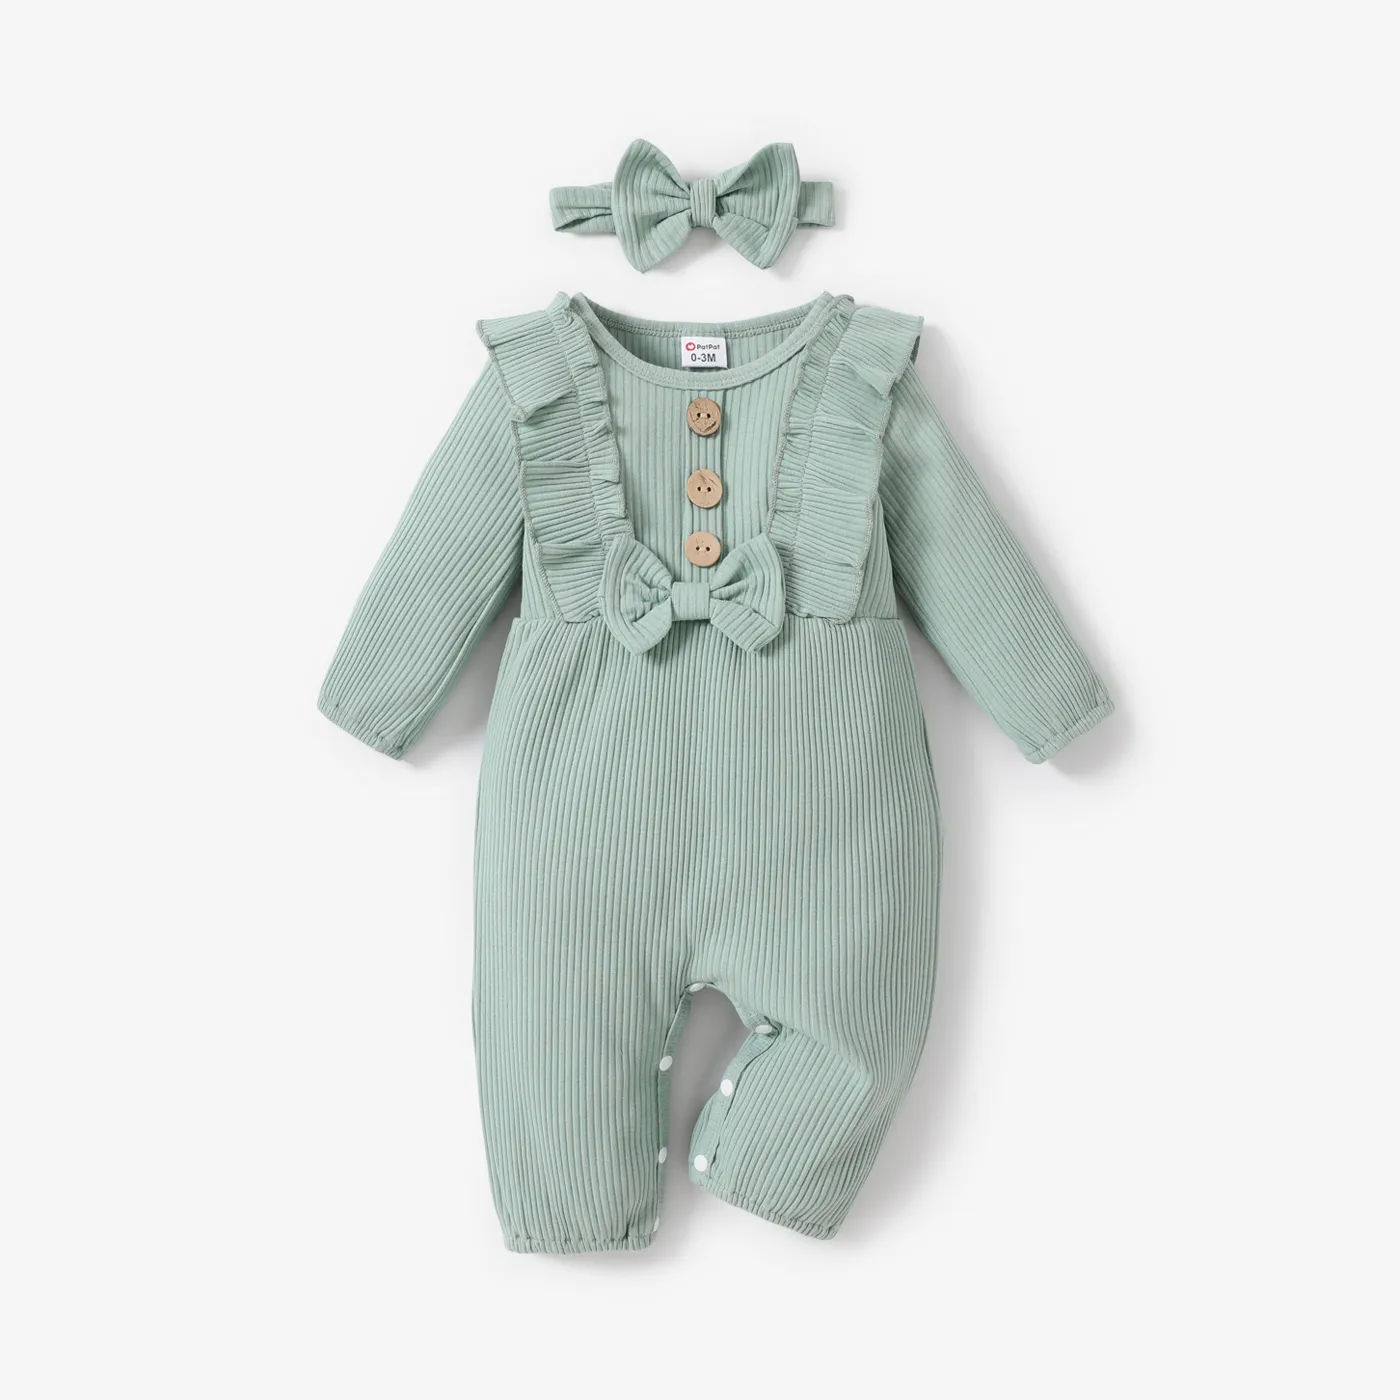 2pcs Baby Girl 95% Cotton Ribbed Long-sleeve Ruffle Bowknot Button Jumpsuit with Headband Set